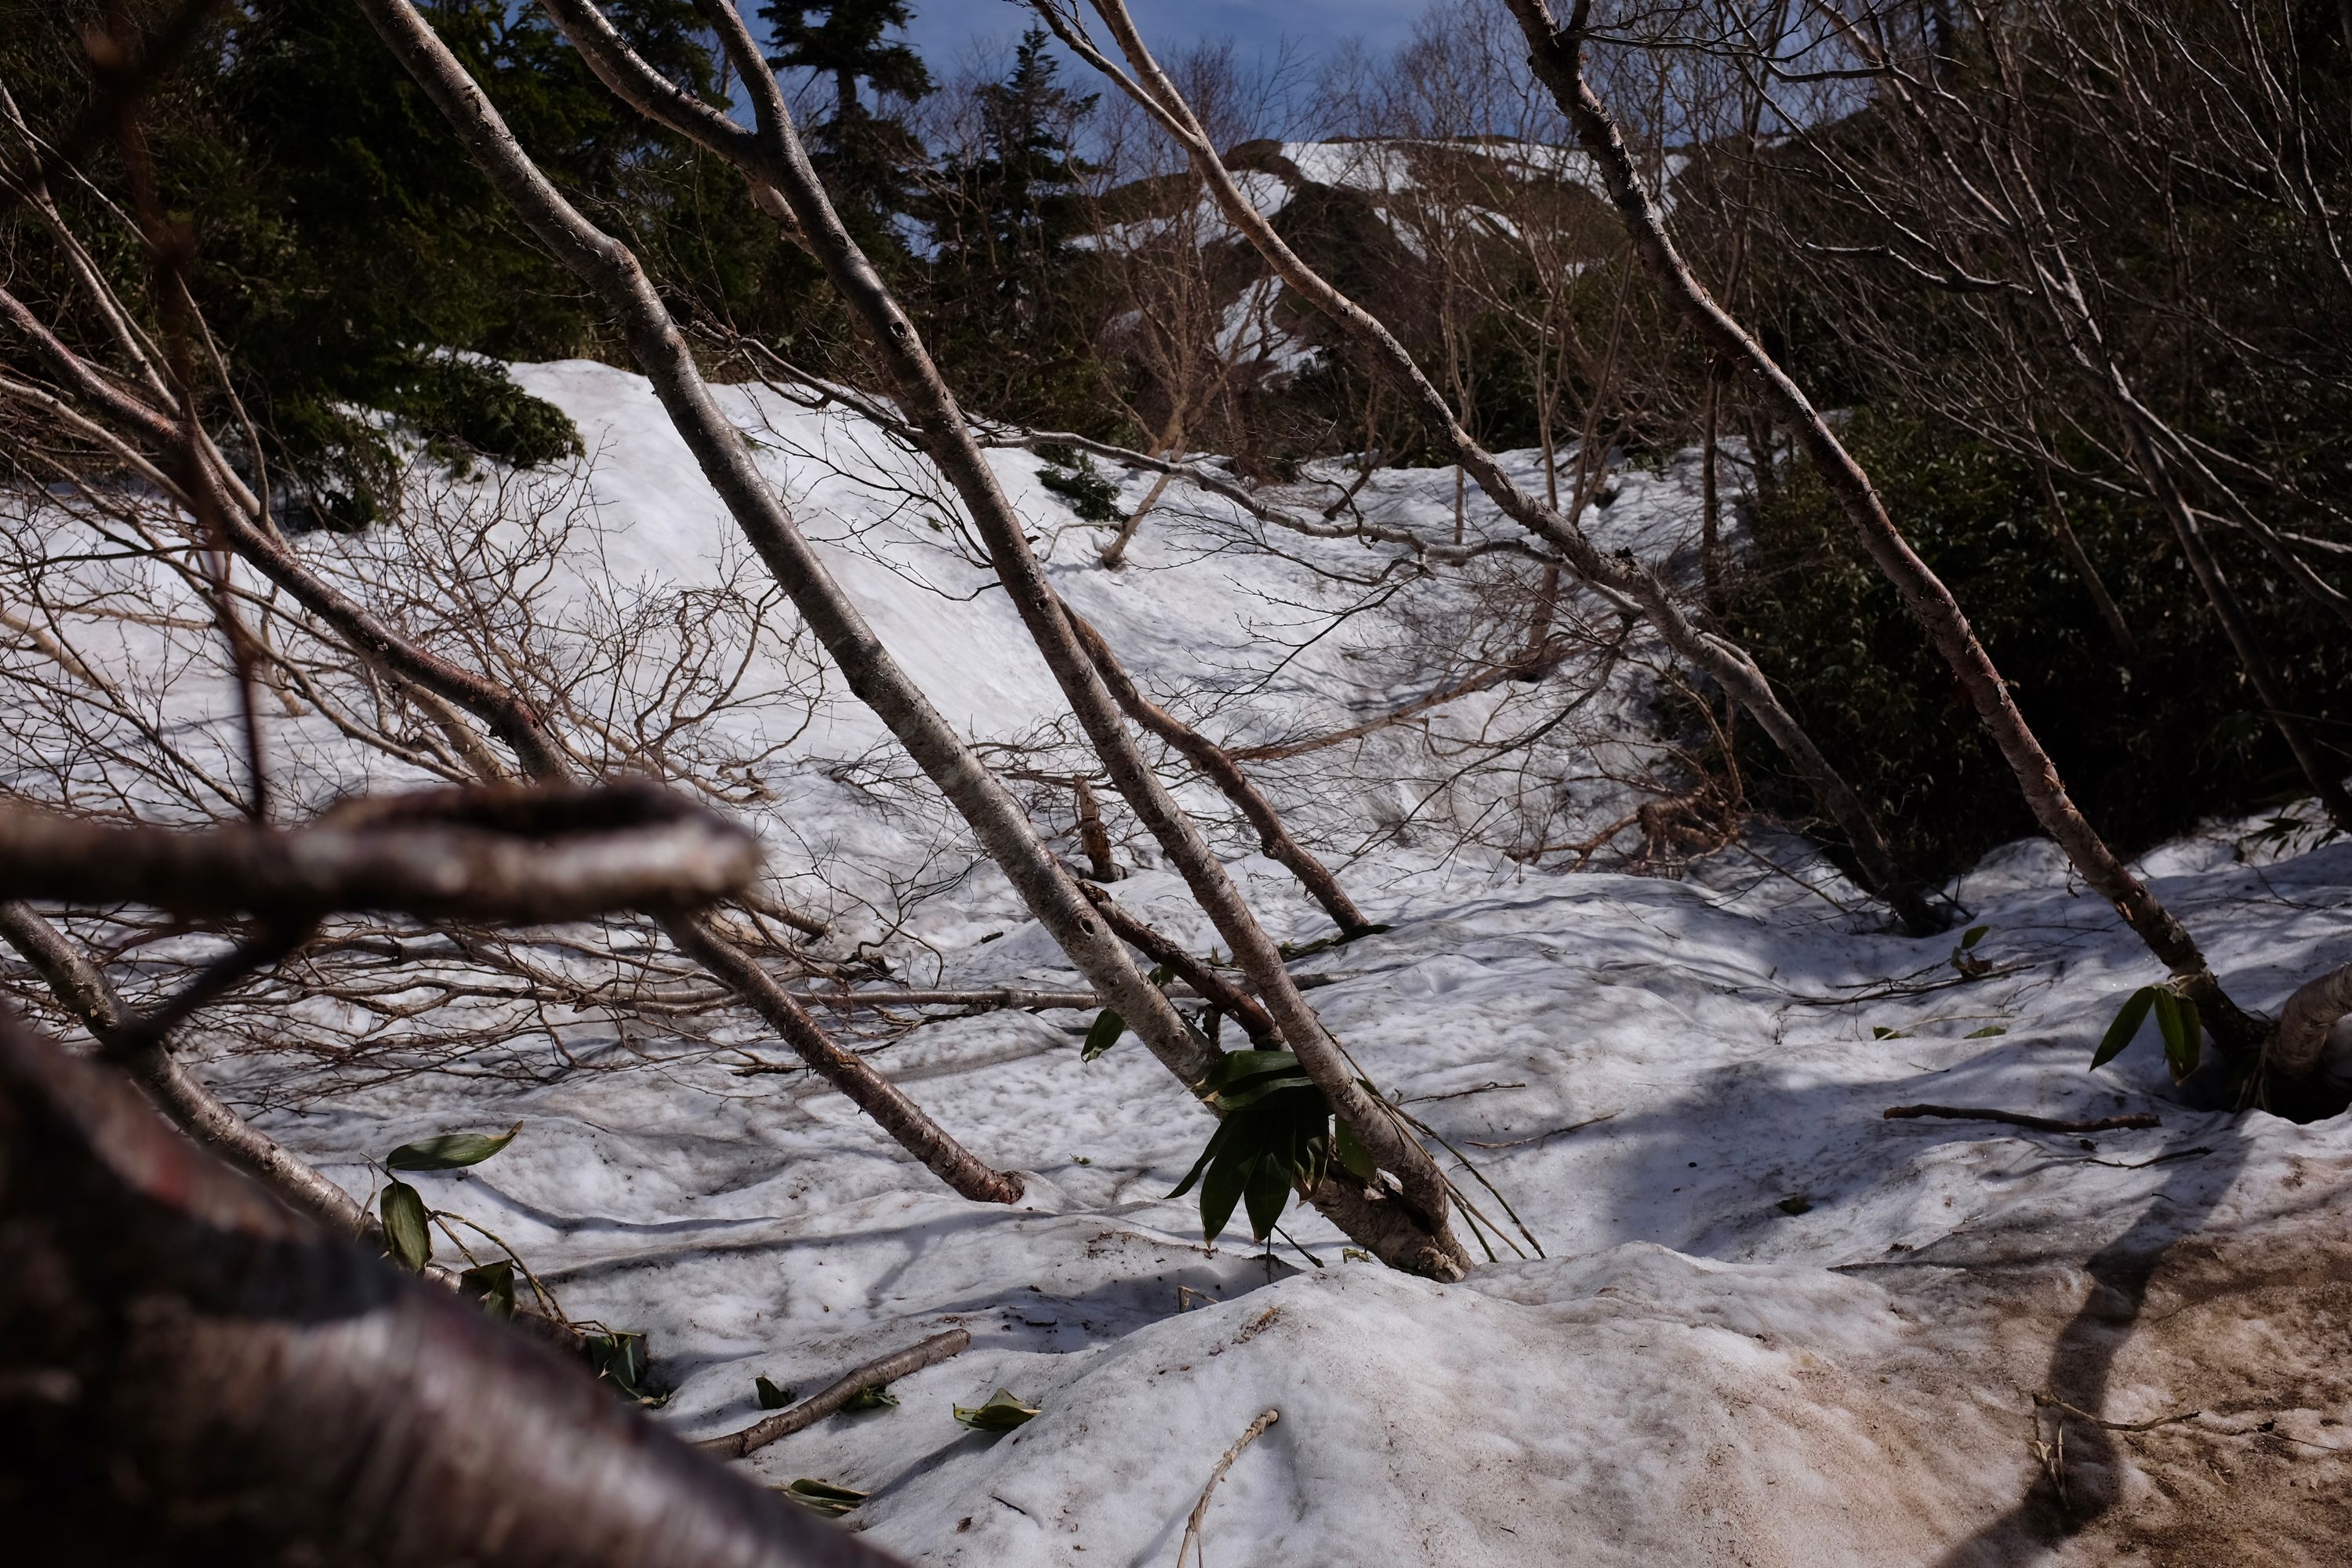 Trees sticking out of last winter’s snow on a mountainside.